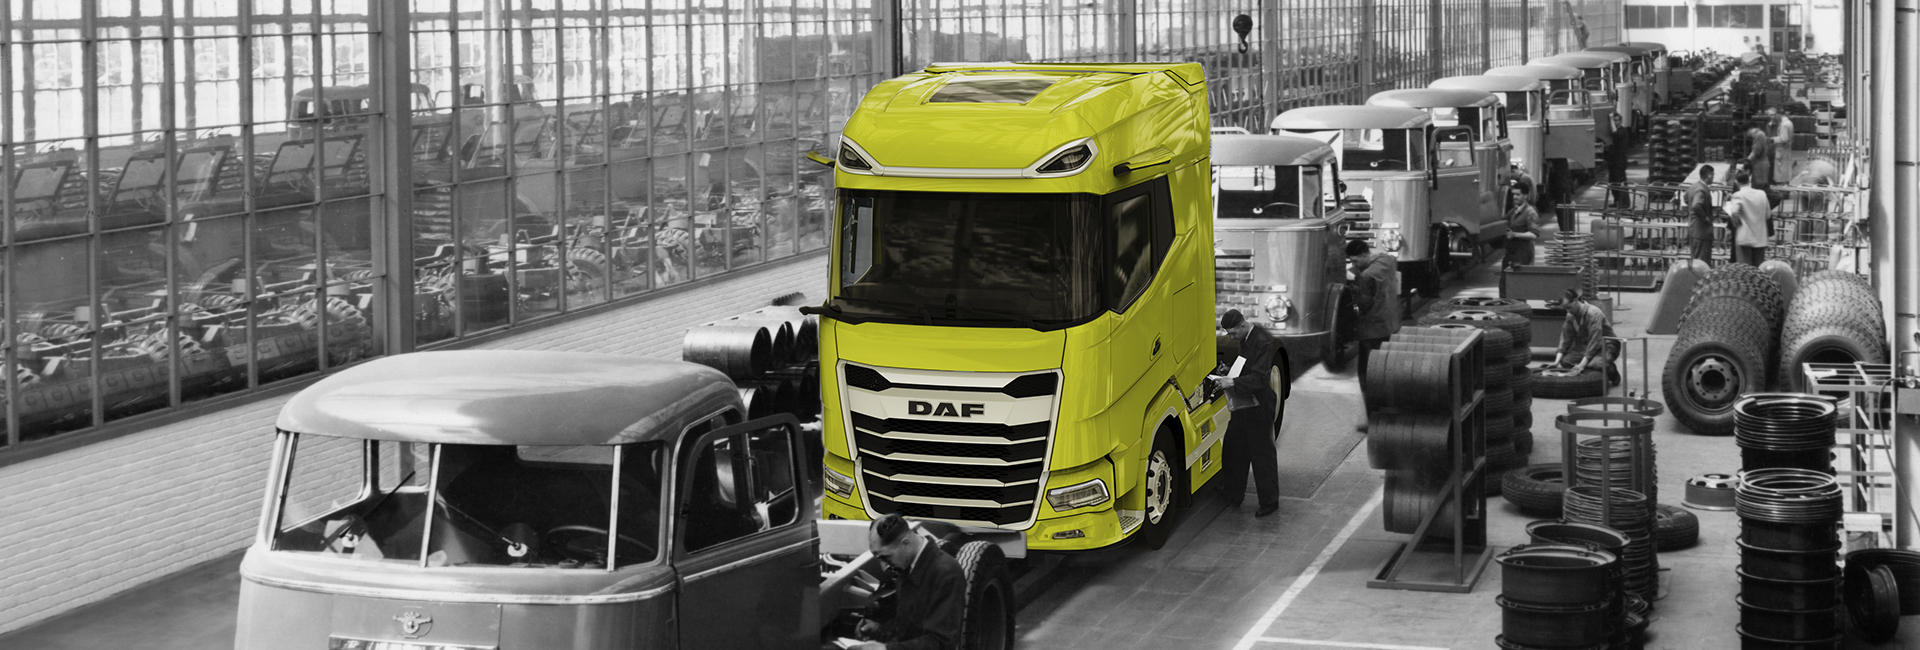 DAF-75-years-of-trucks-from-Eindhoven-header-visual